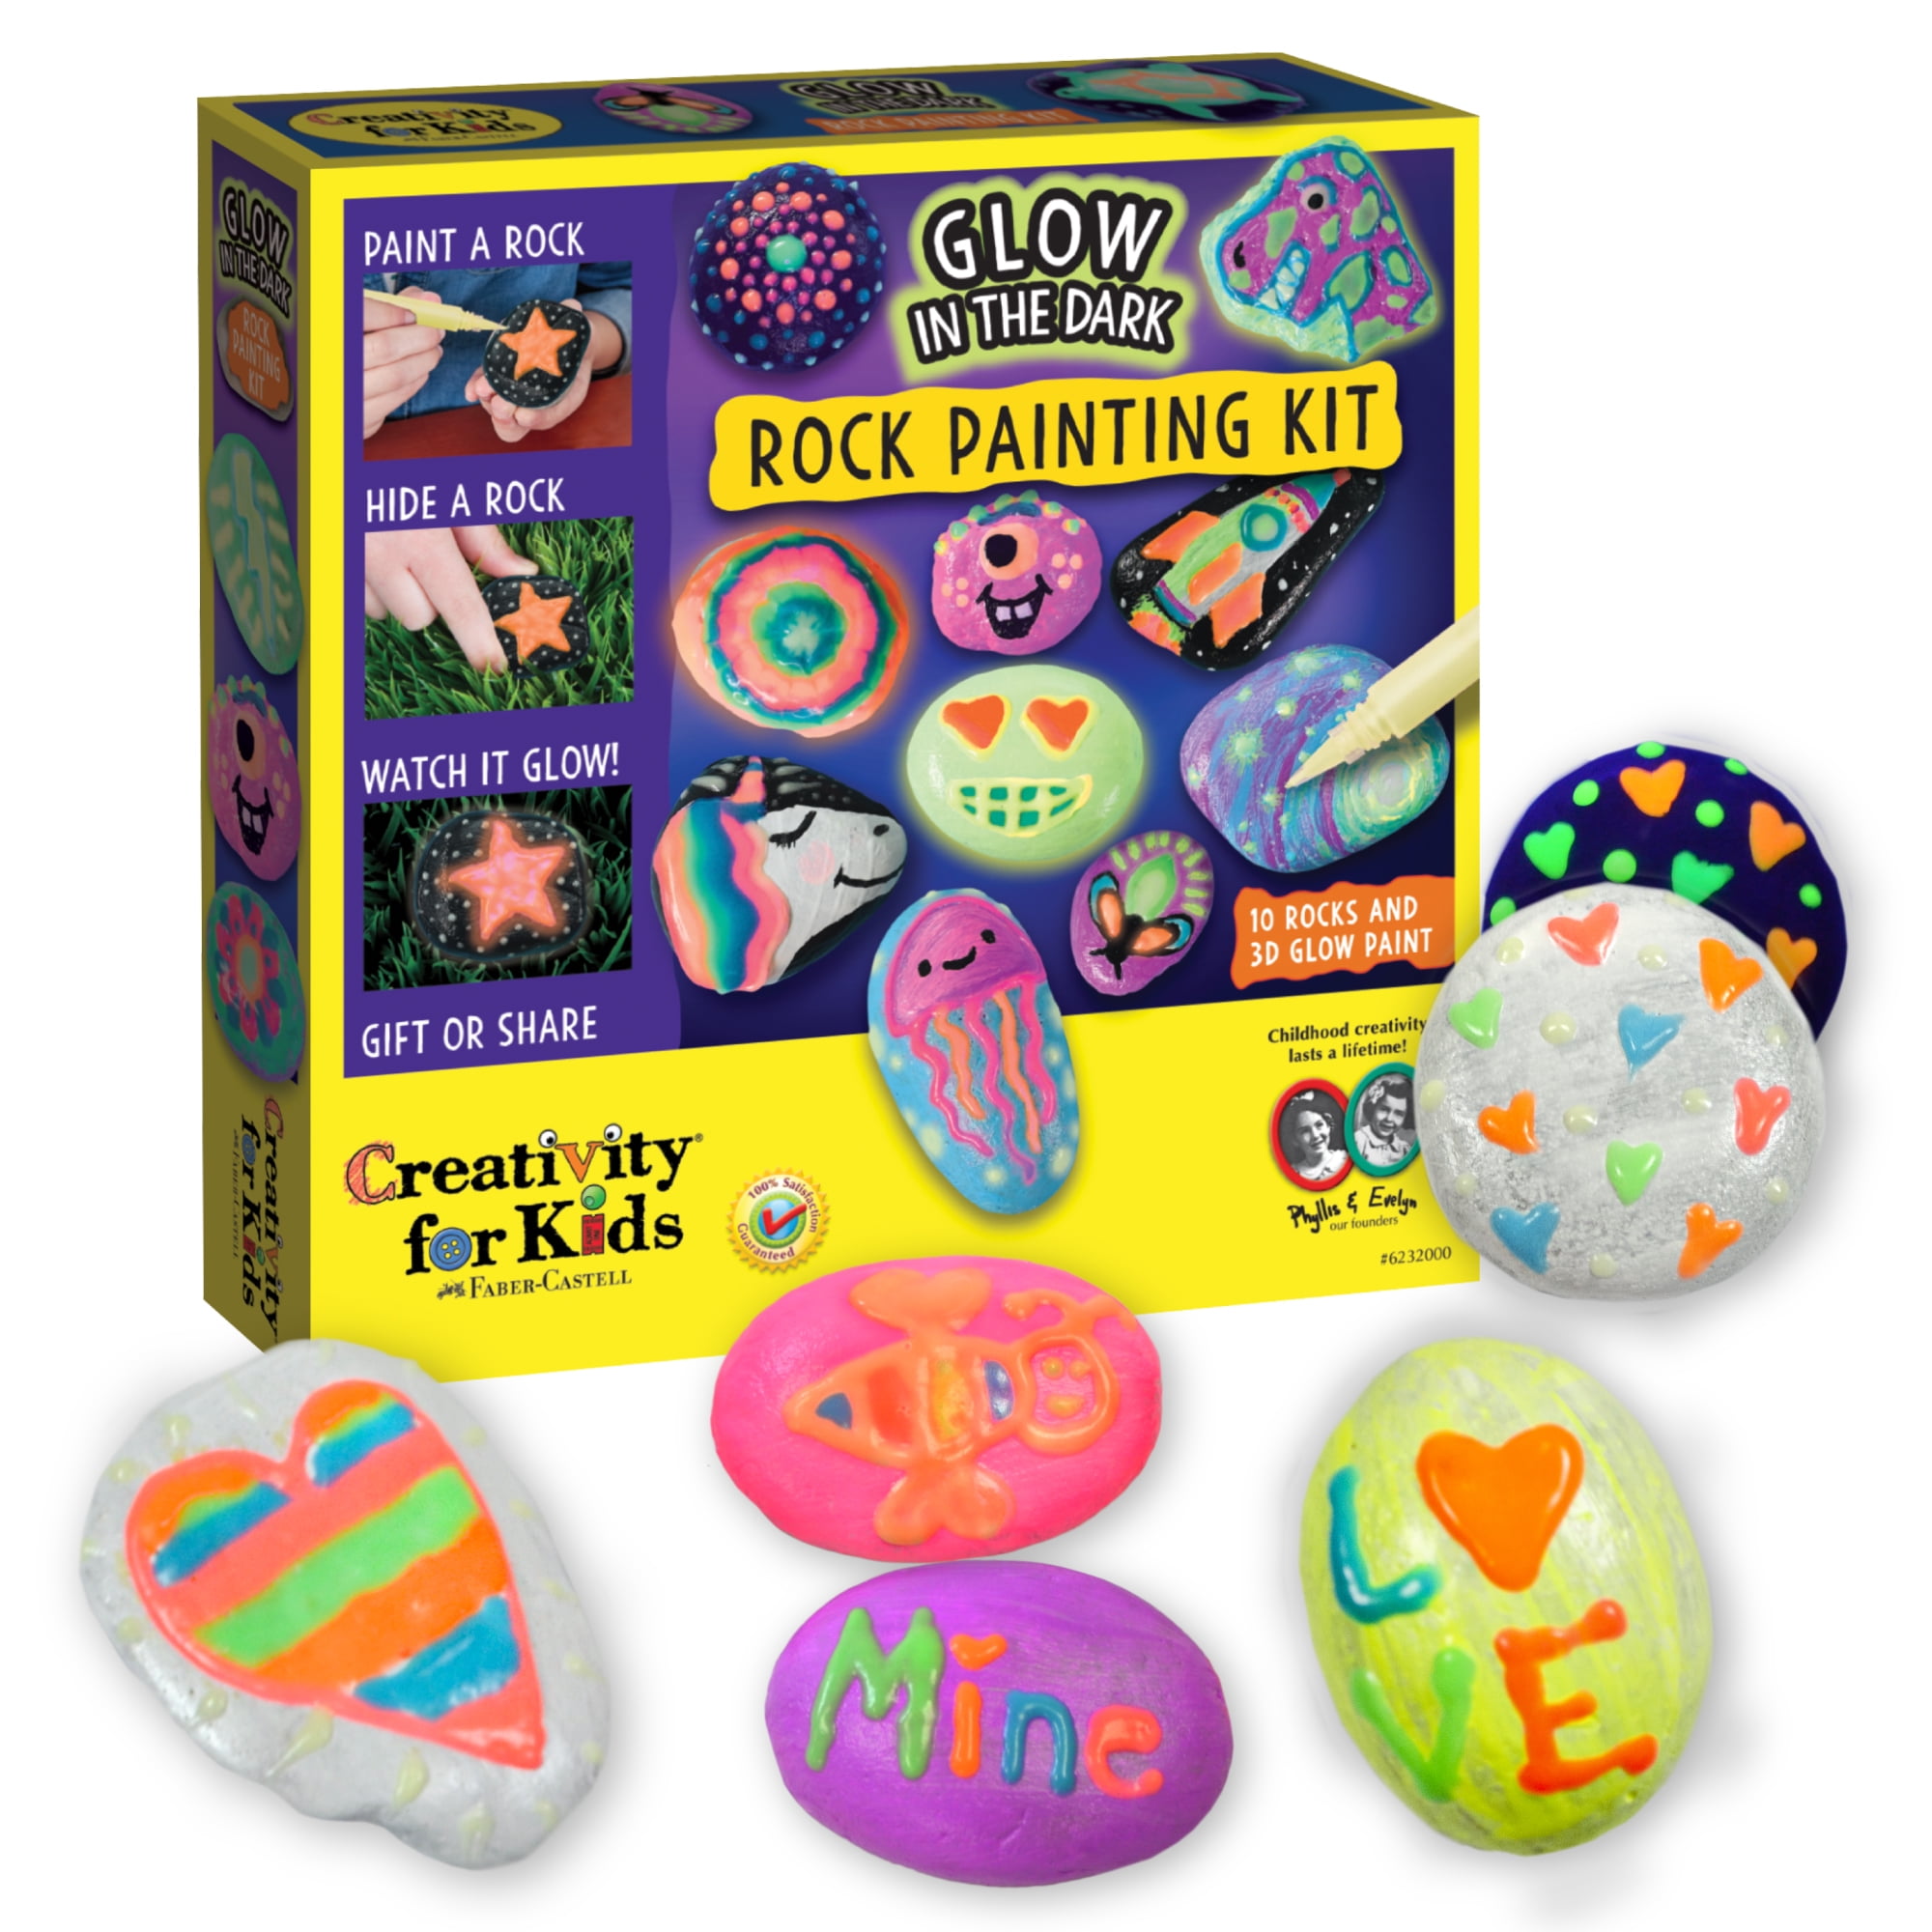 Glow in the Dark Rock Painting Kit – 5 Minute Crafts